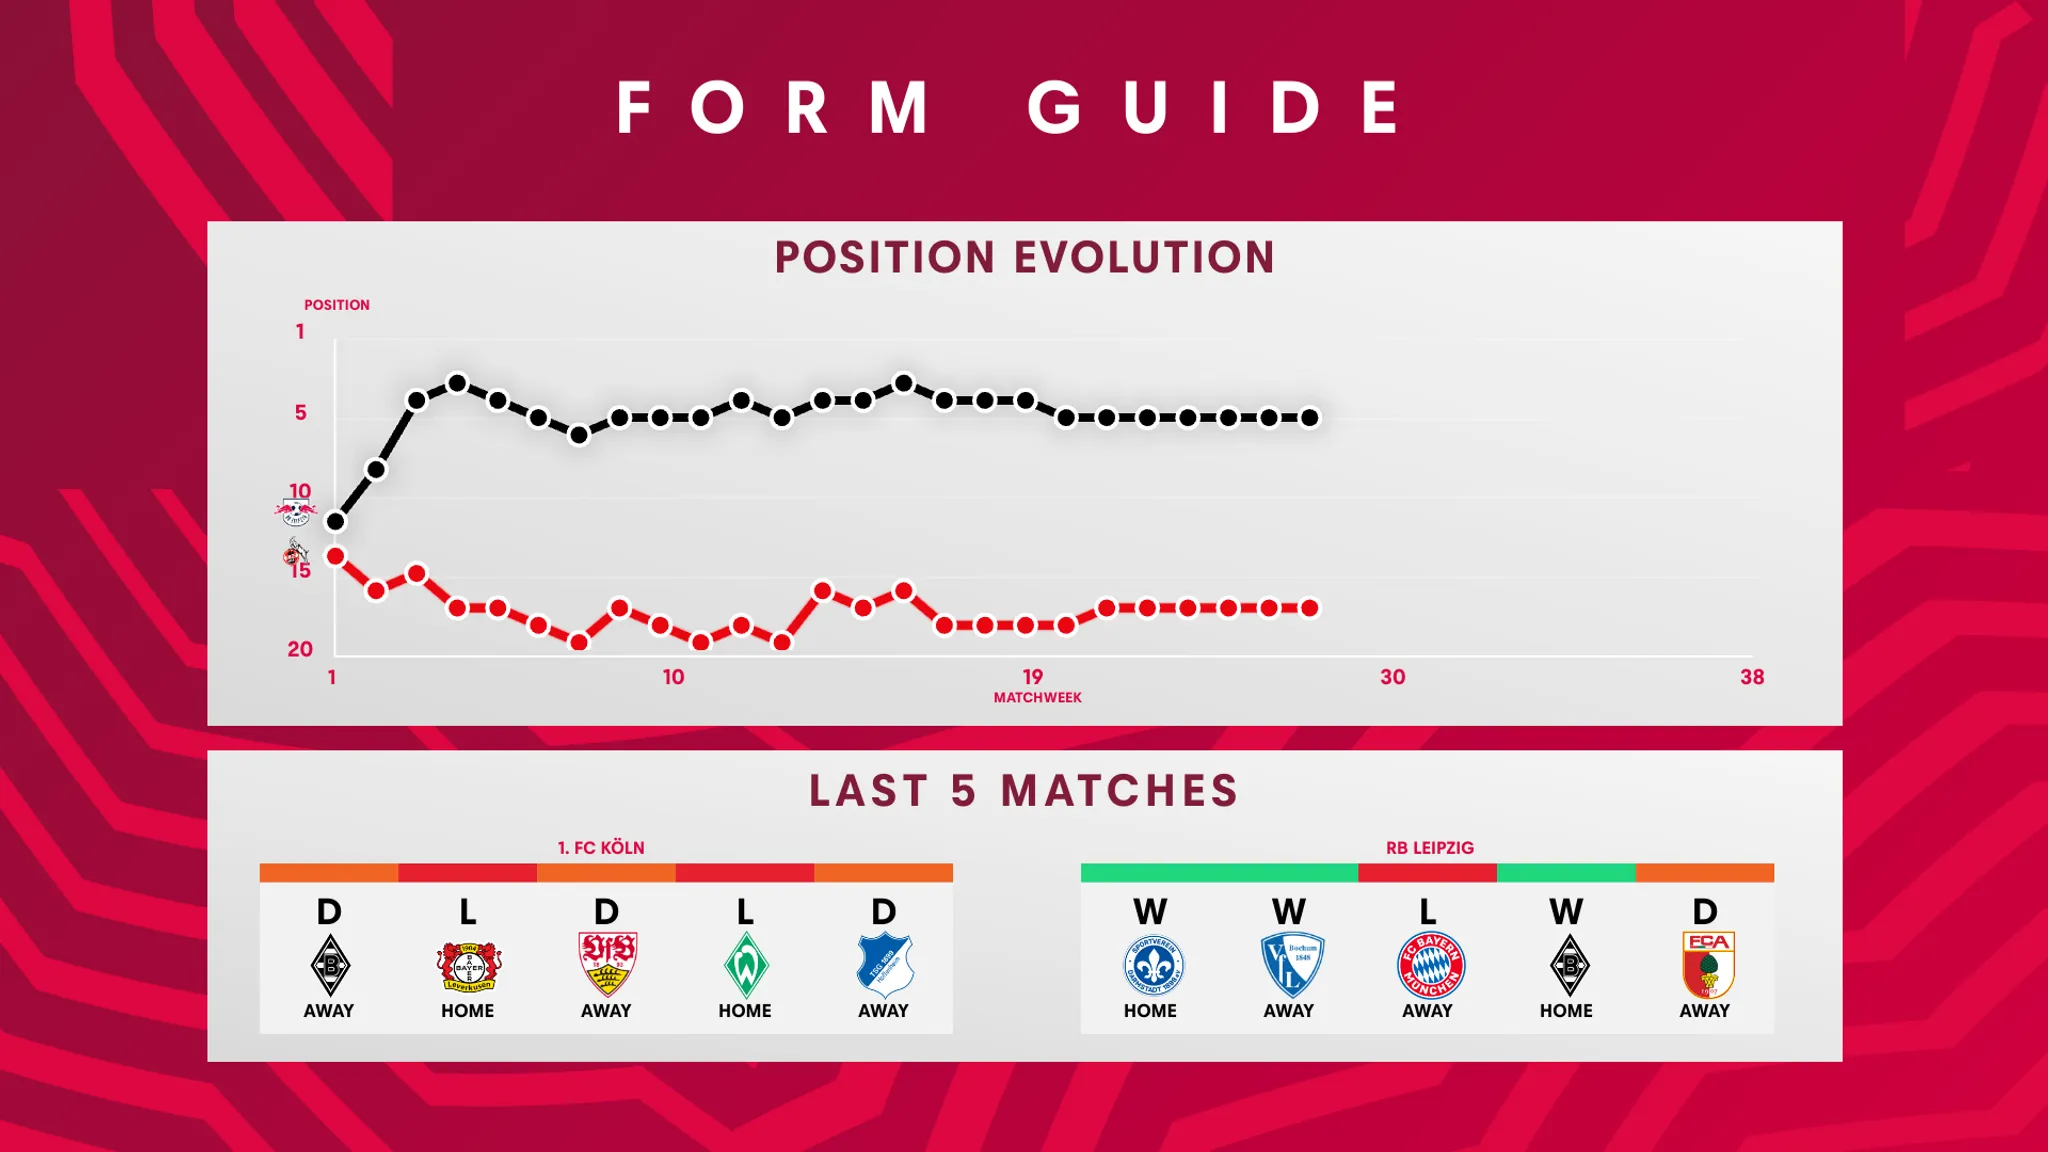 The form curve of RB Leipzig and 1. FC Köln.